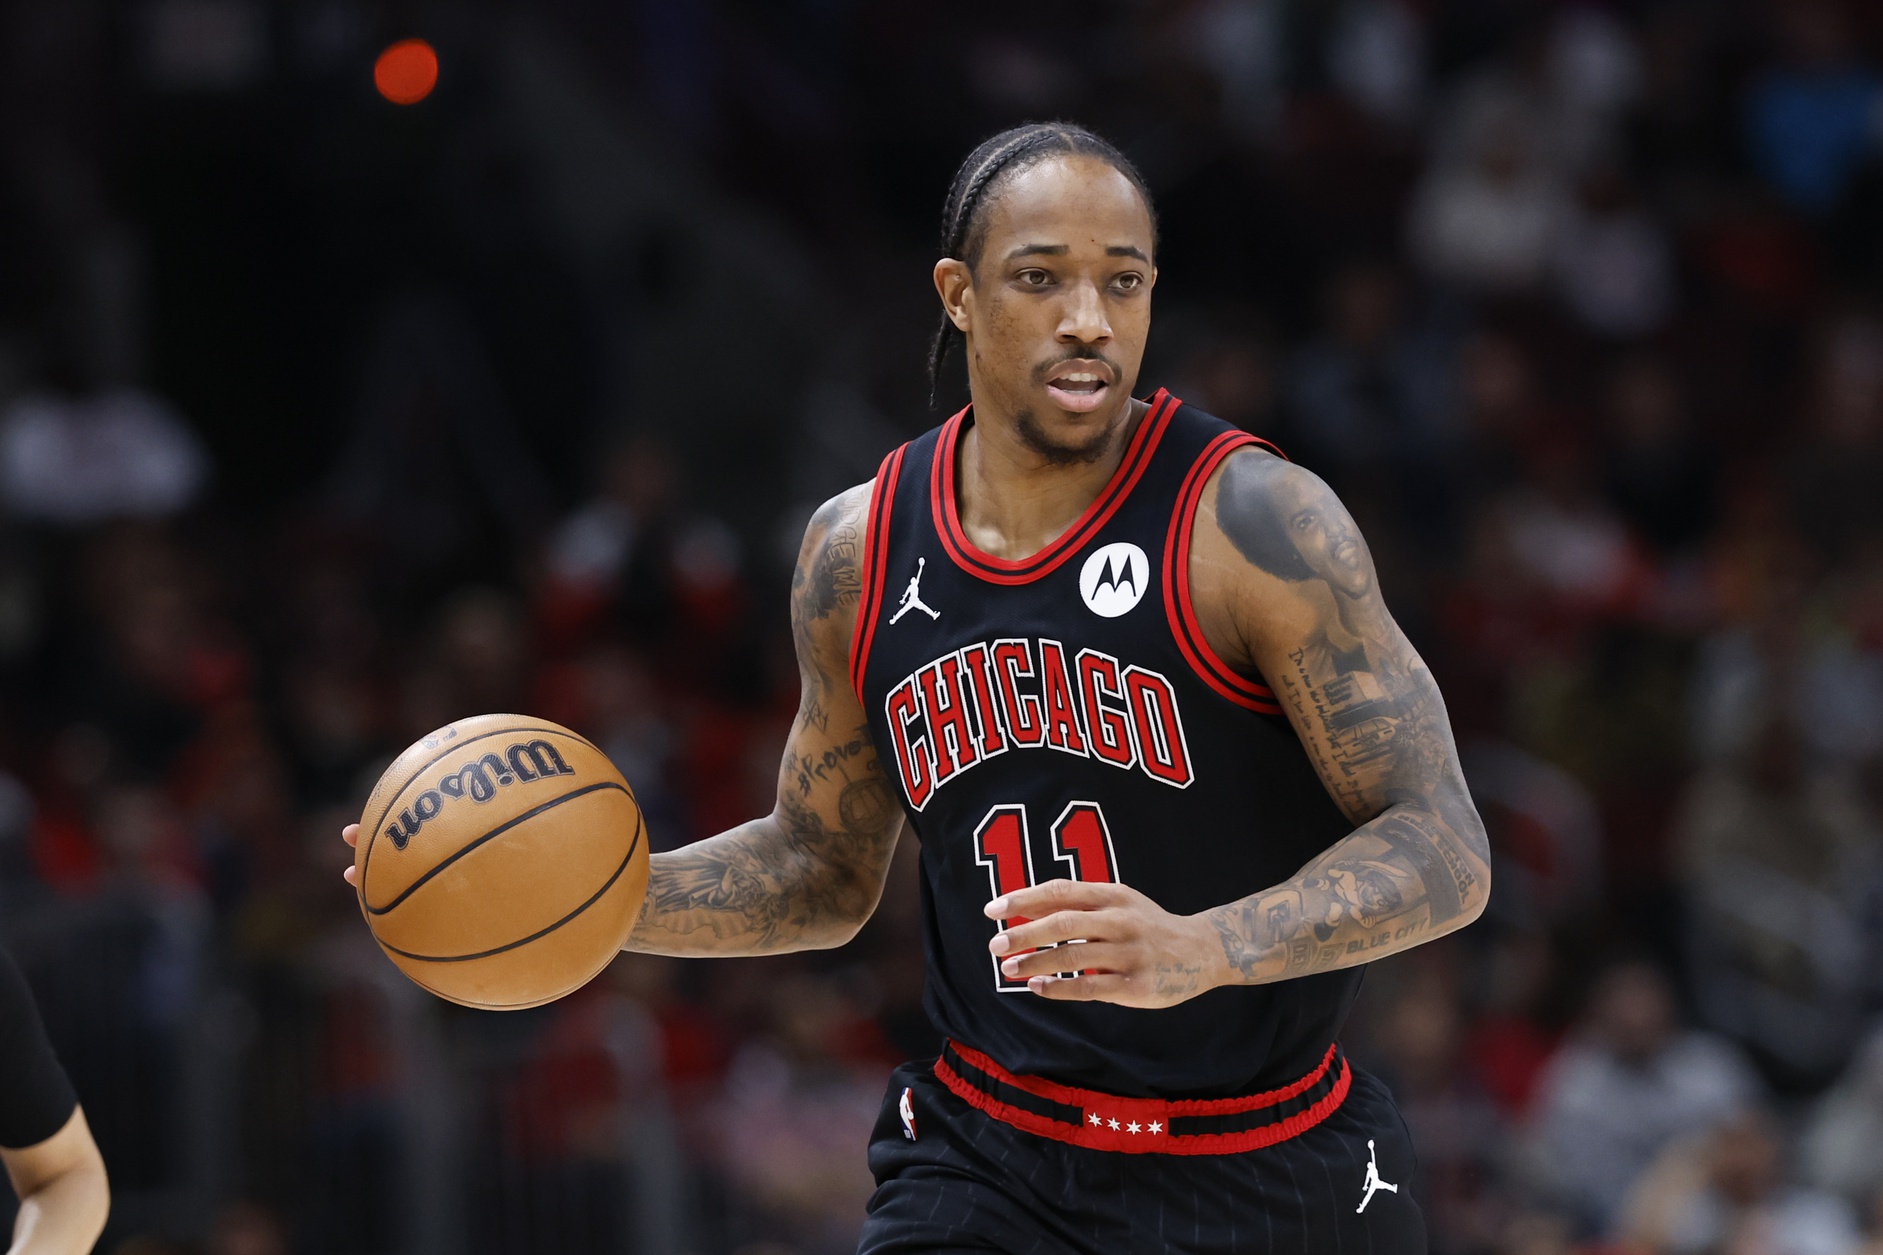 DeMar DeRozan's contract with the Bulls is set to expire this off-season.